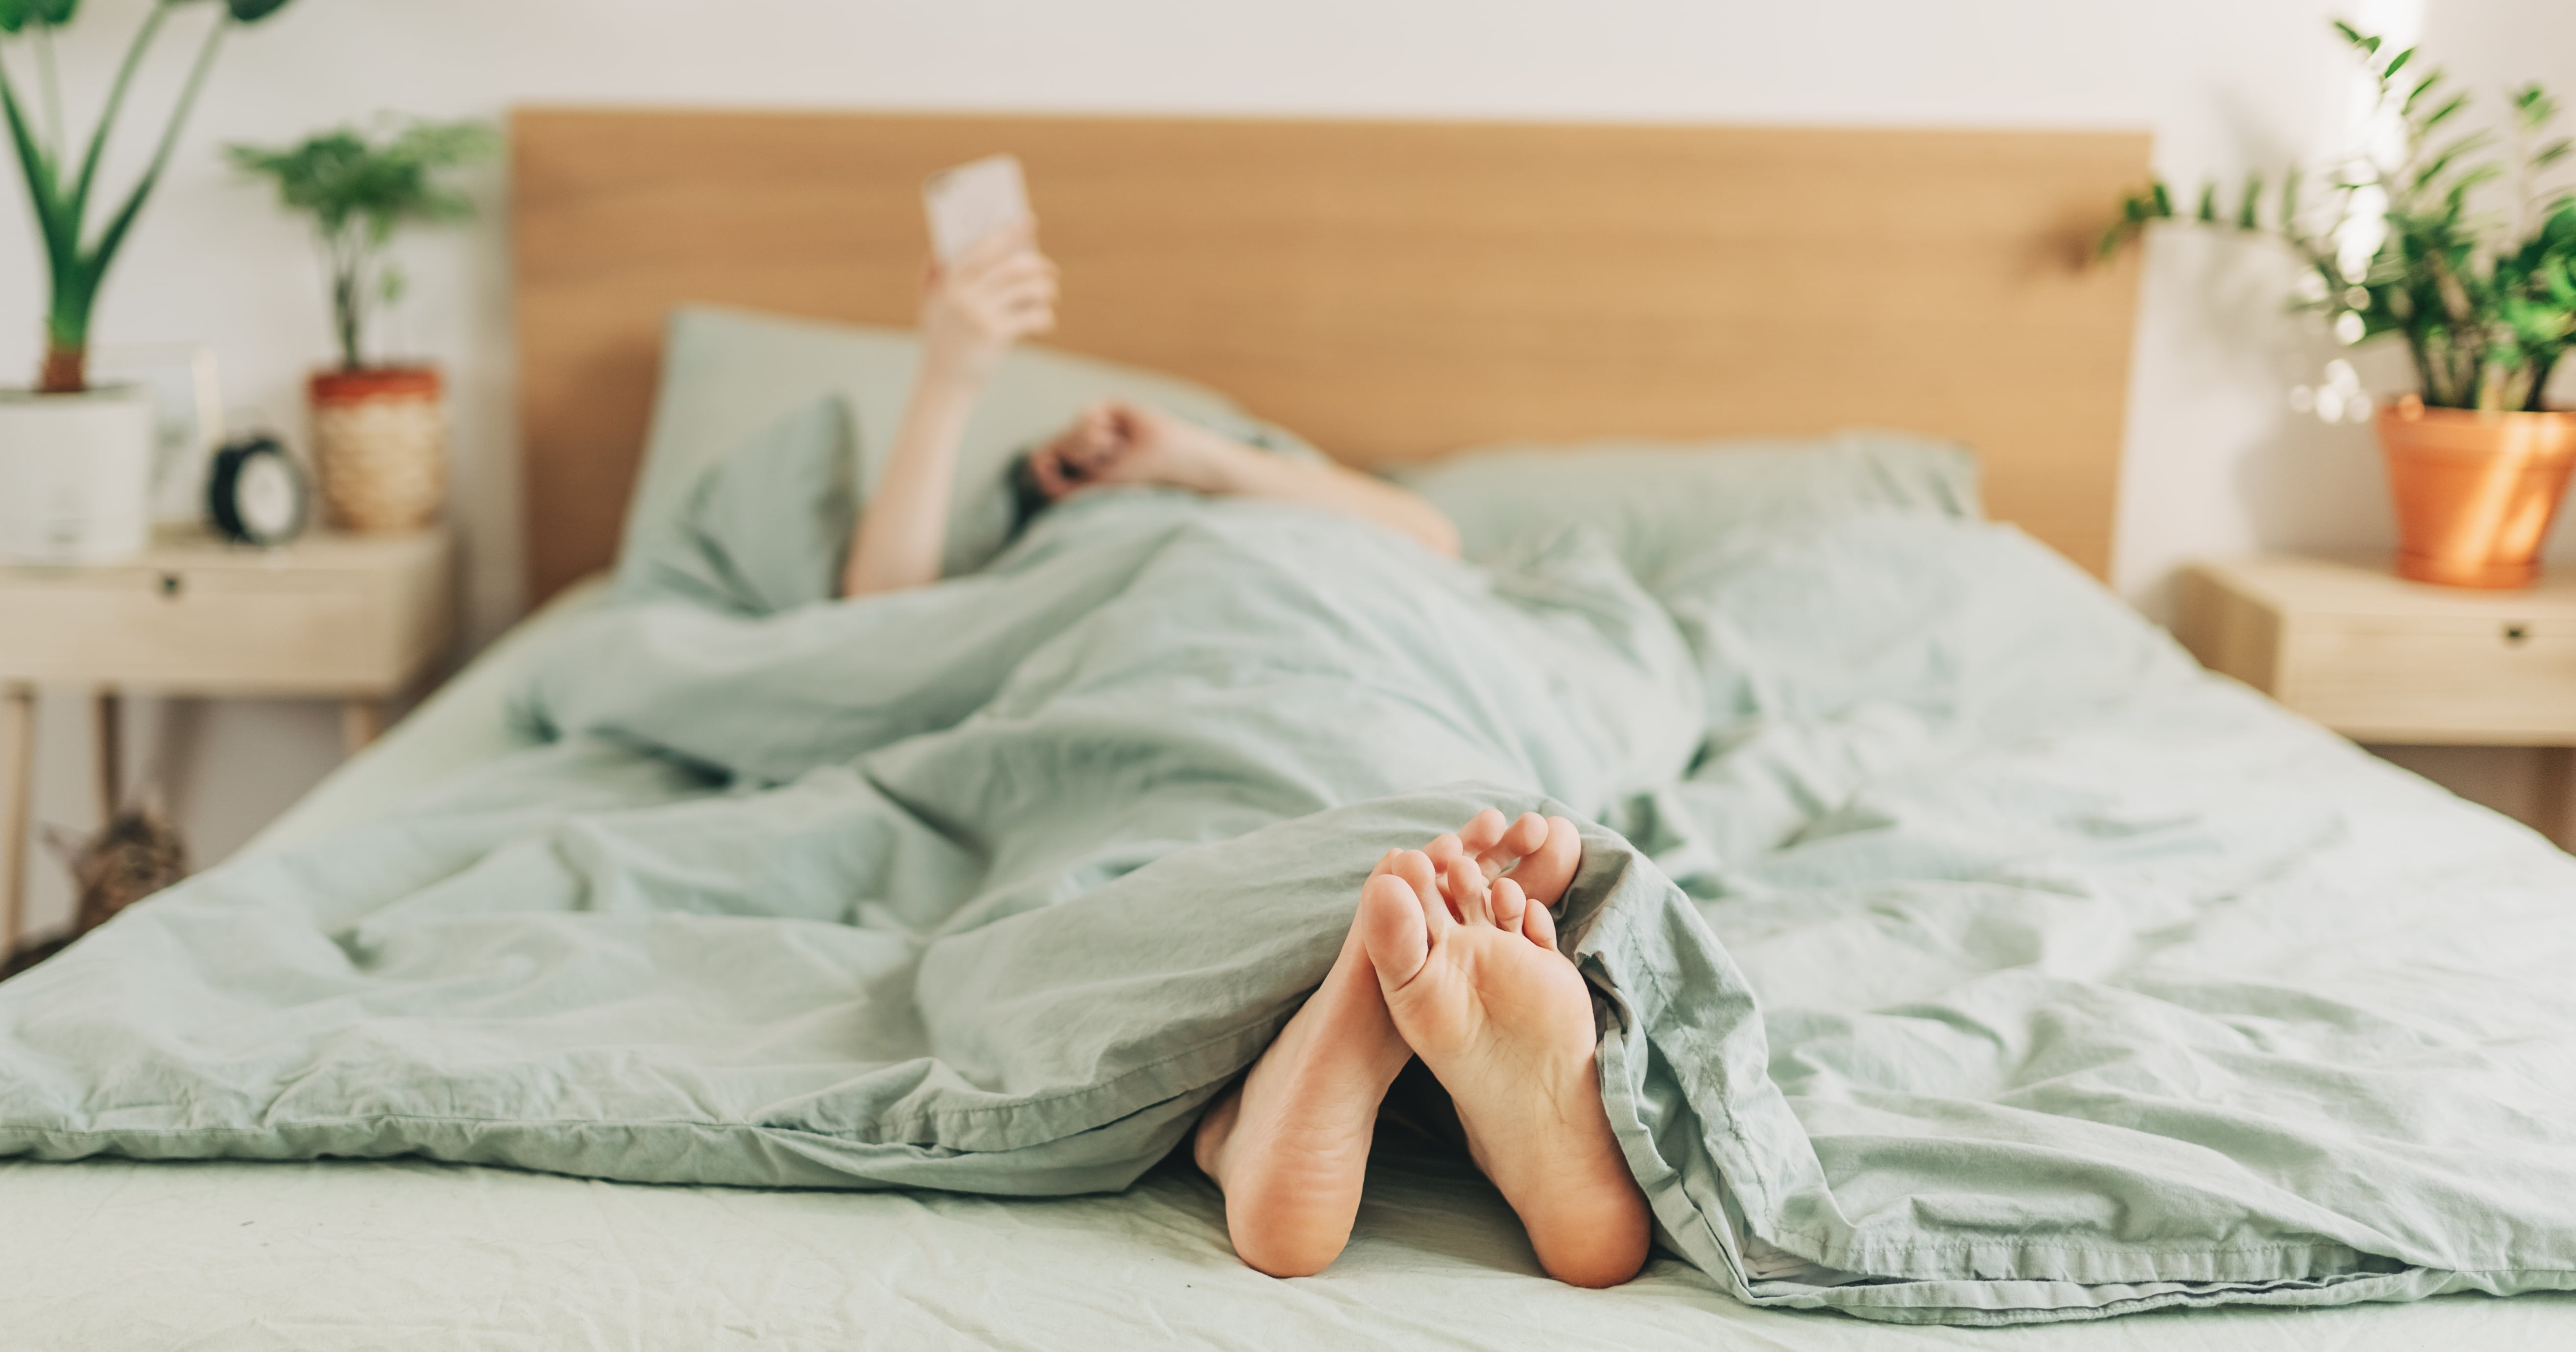 Will Bed Rotting Actually Make You Feel Better?